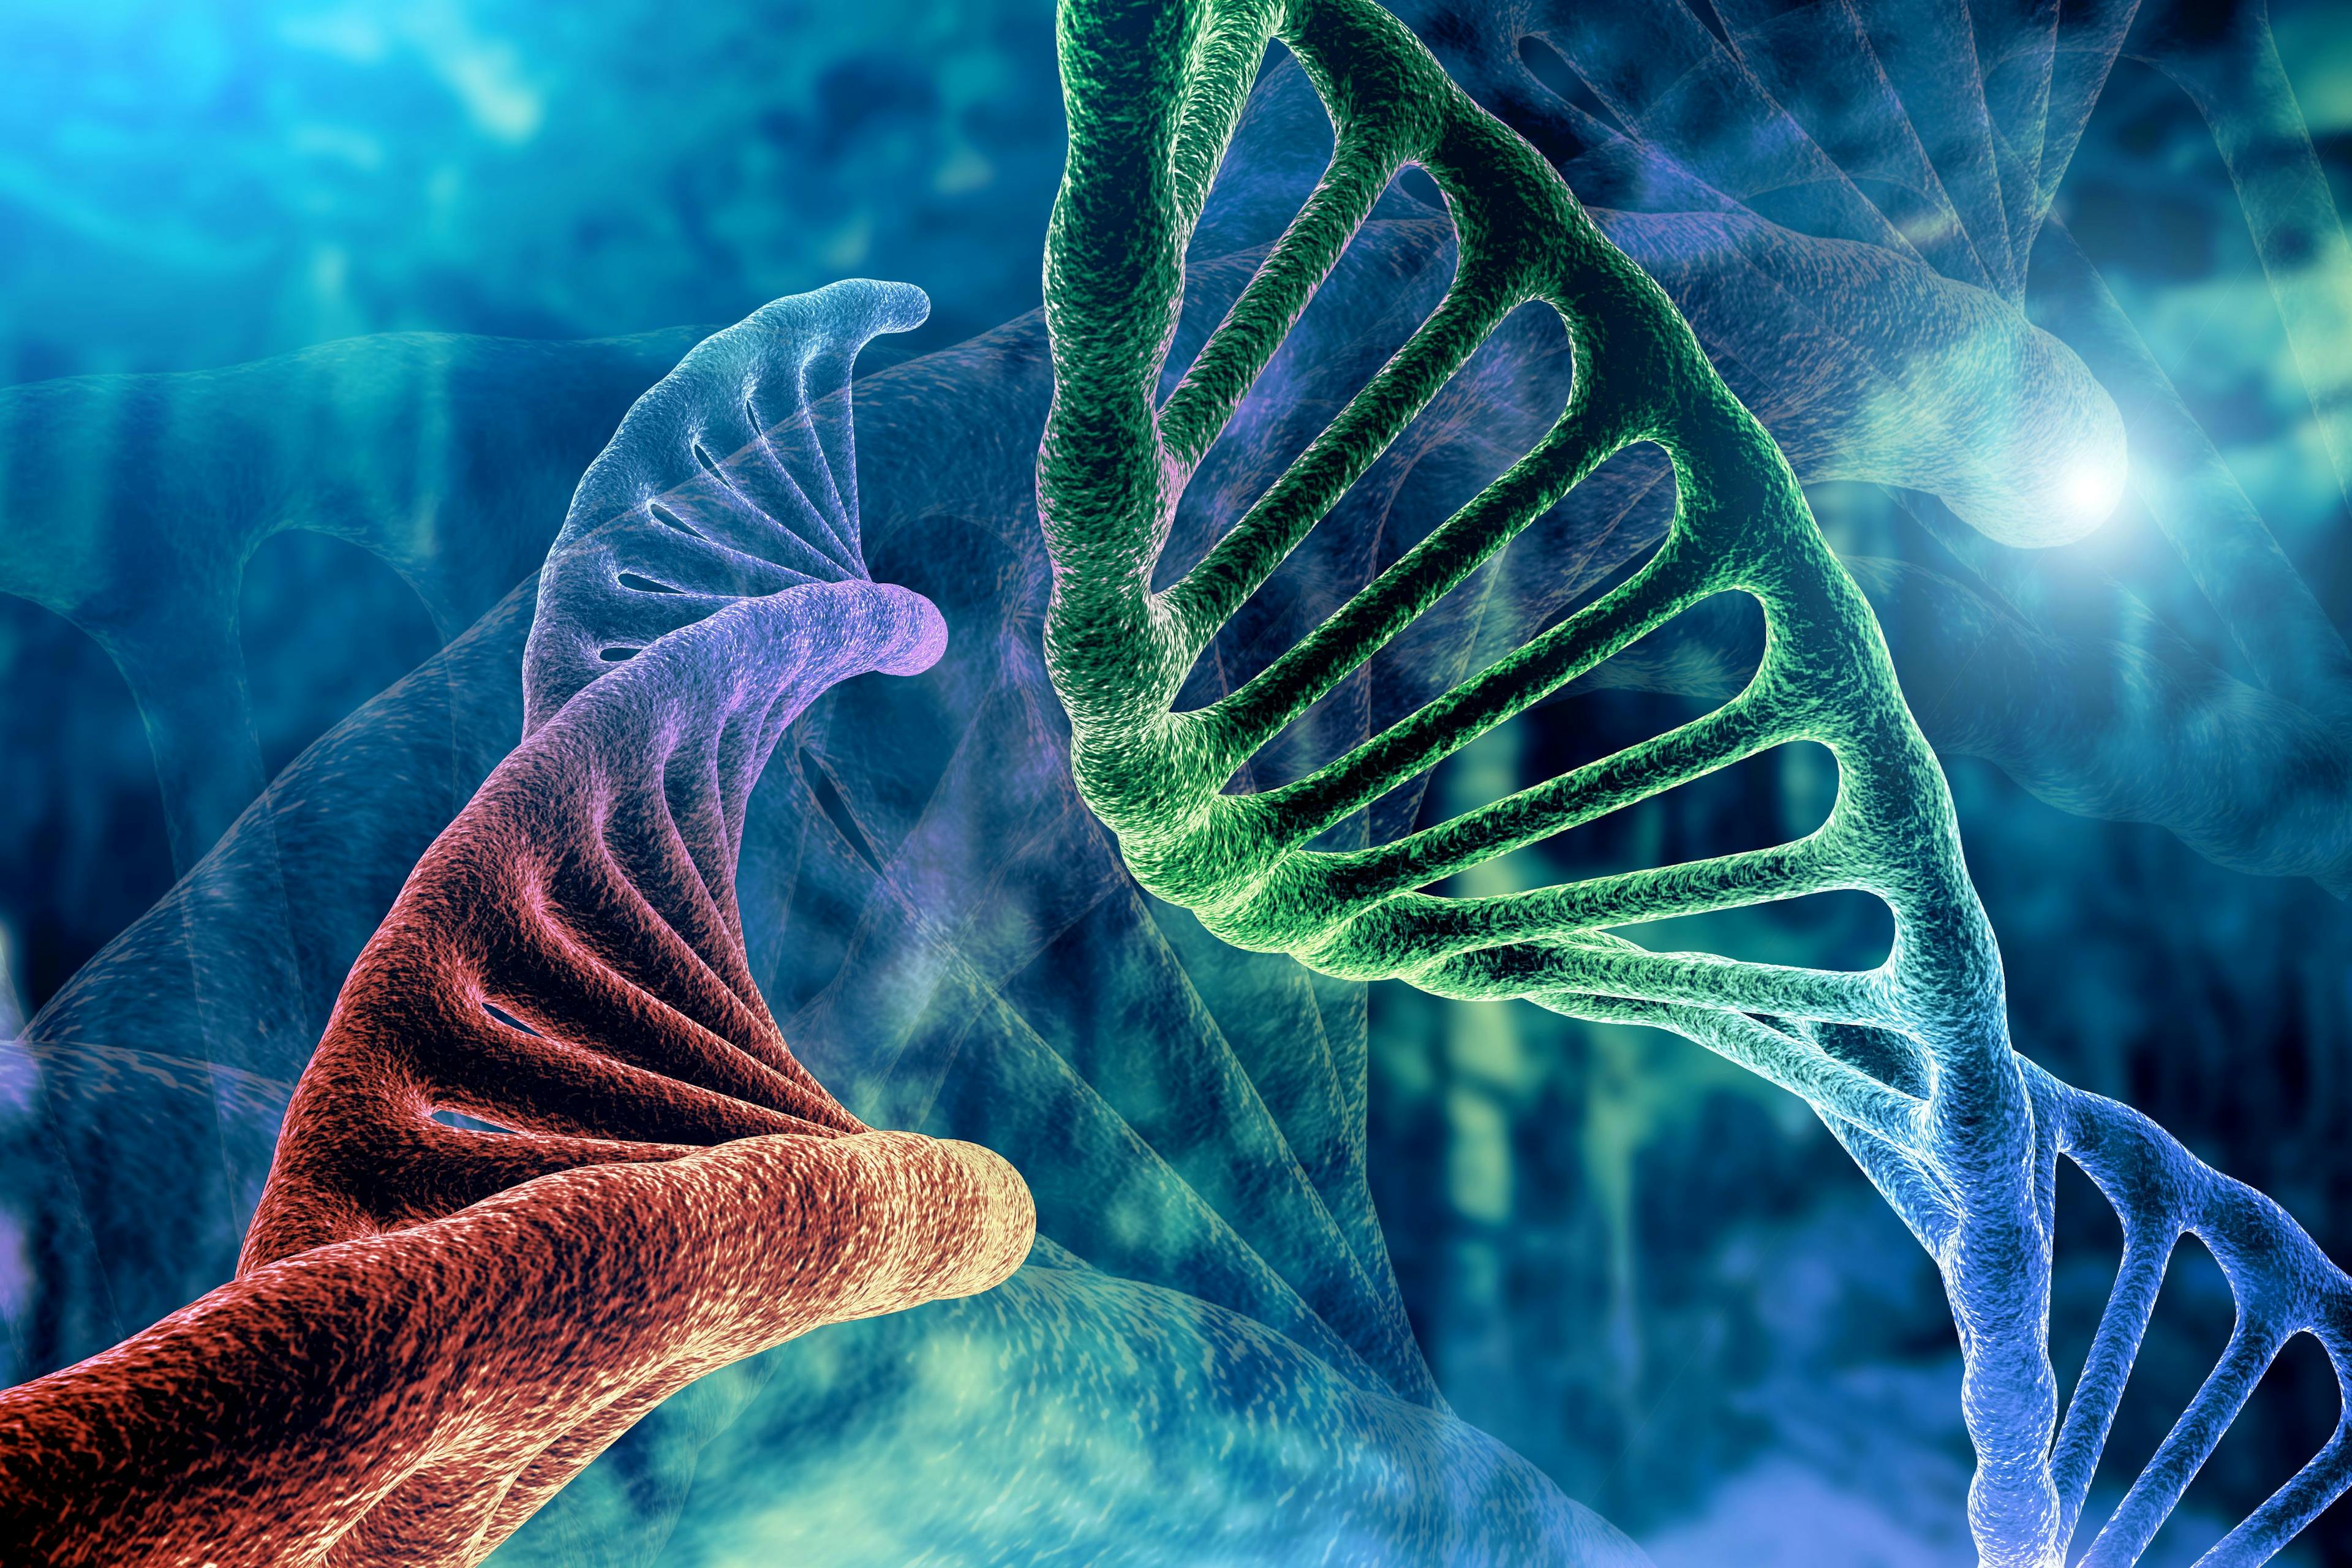 Sarepta’s DMD Gene Therapy Goes In Front of FDA With BLA Submission